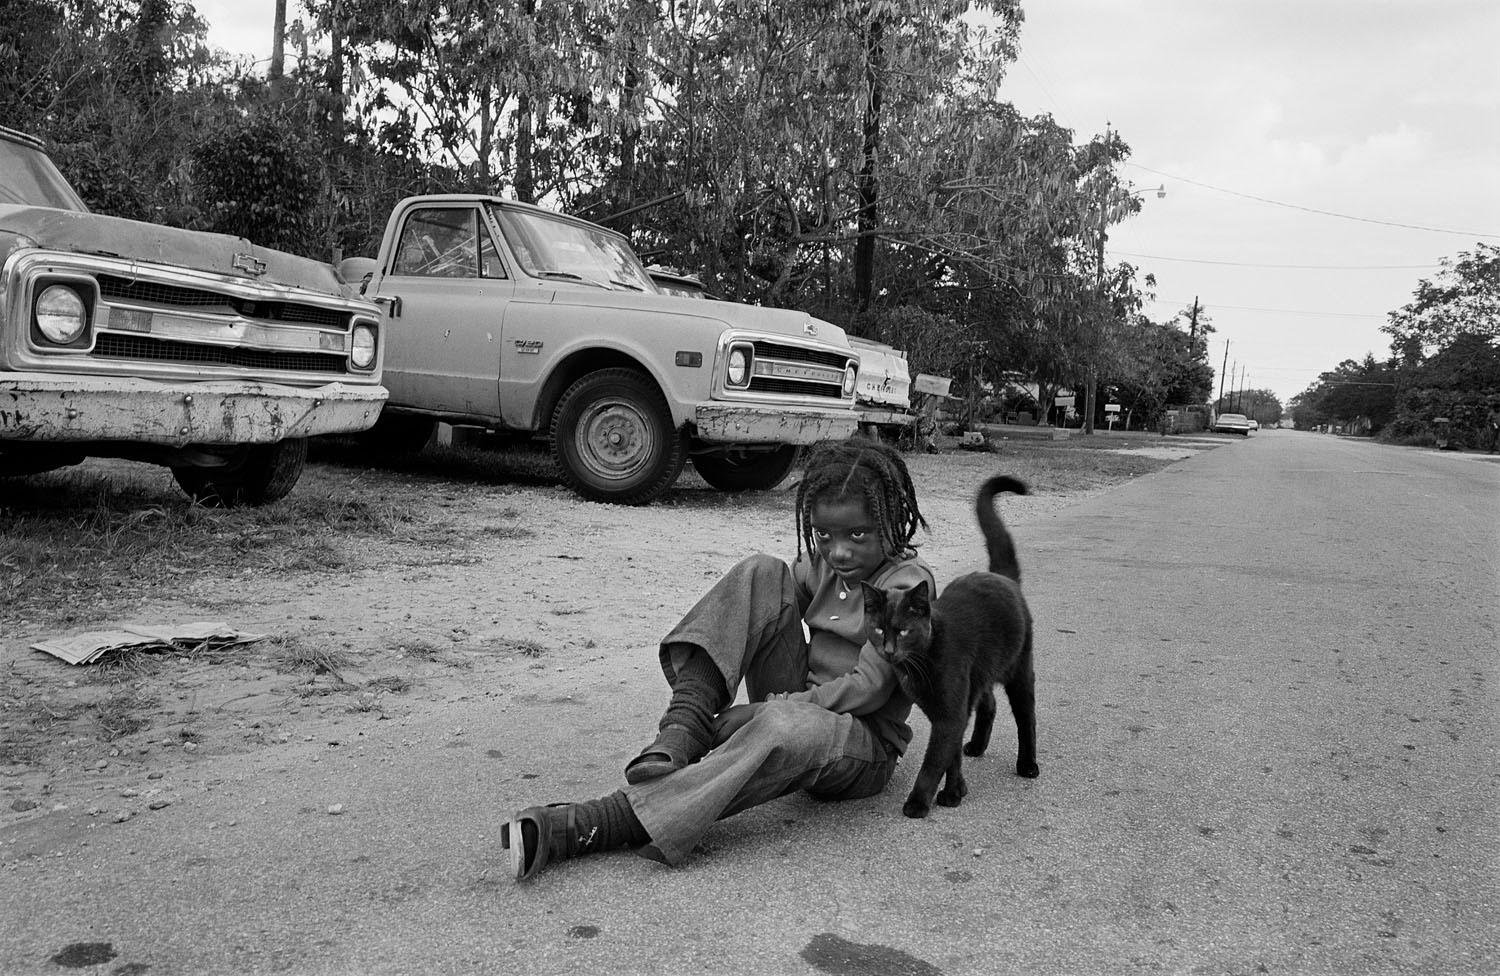   Perrine, Florida #1, 1981; printed 2023   Gelatin Silver Print  12 x 18 1/4 in. (image size)  The Do Good Fund Inc., 2023-005 